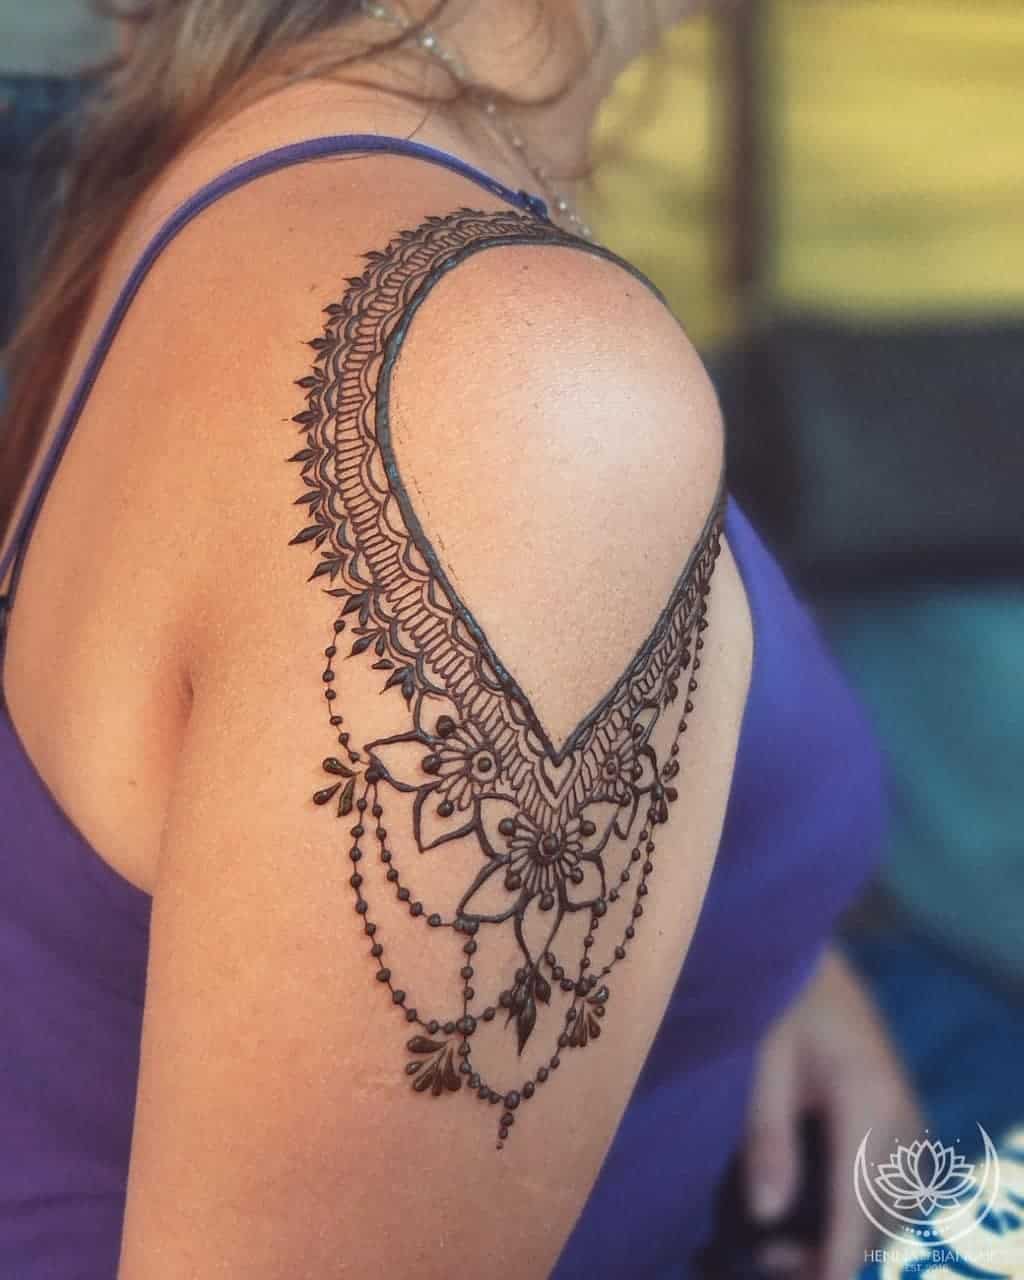 50+ Henna Tattoo Concepts - Lovely Inspirations | instasave By0ctm3B3qR 1 1